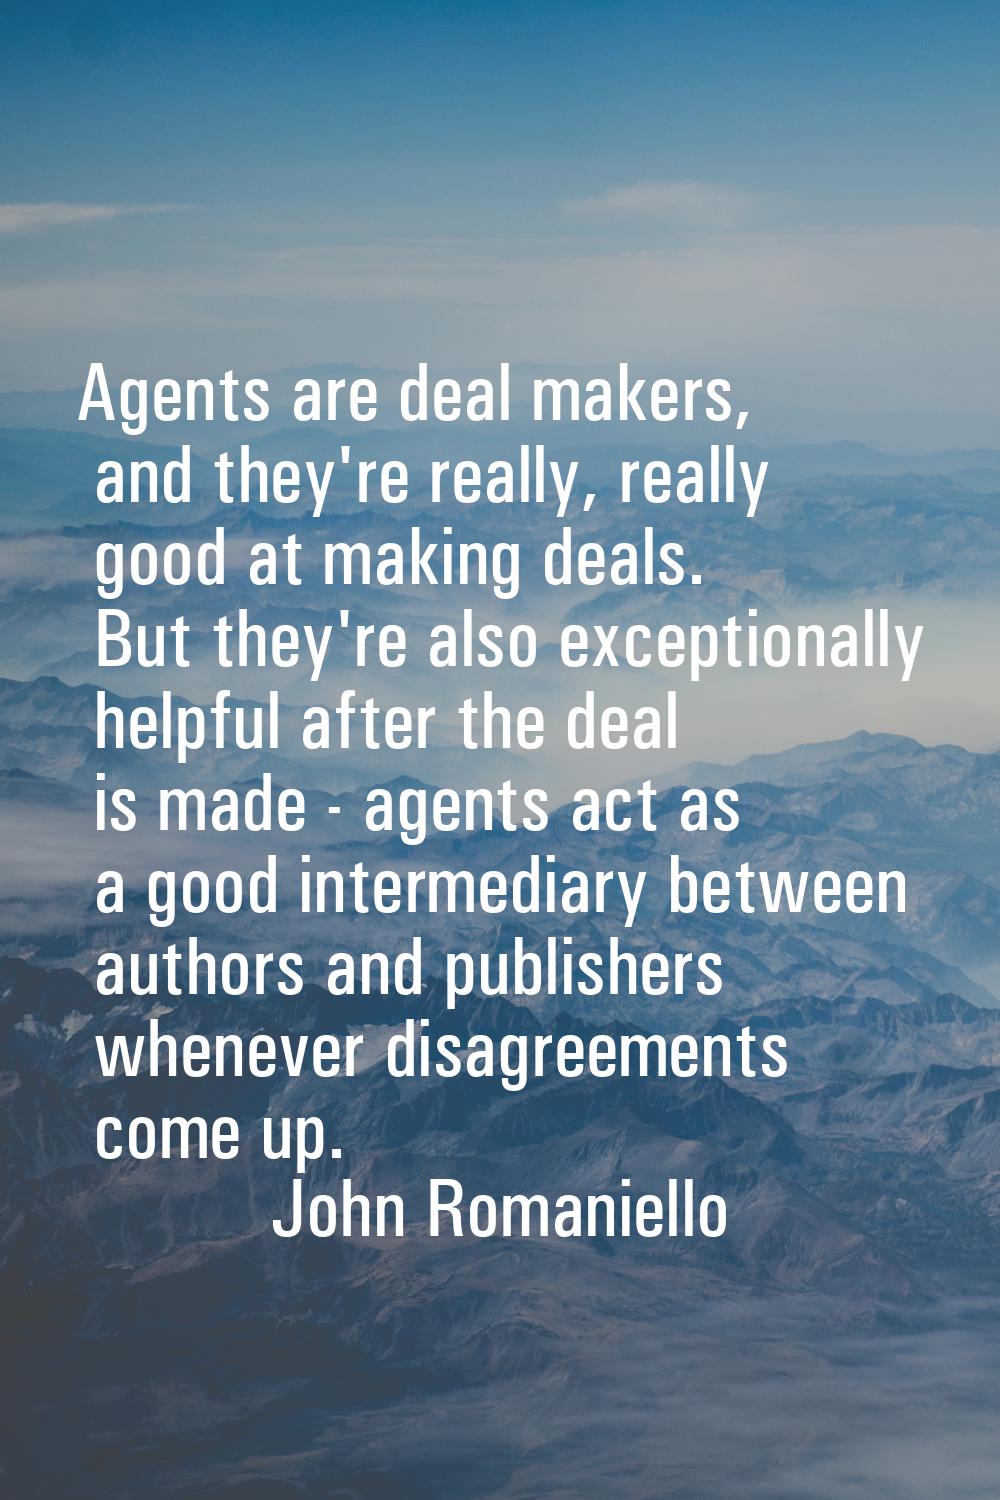 Agents are deal makers, and they're really, really good at making deals. But they're also exception